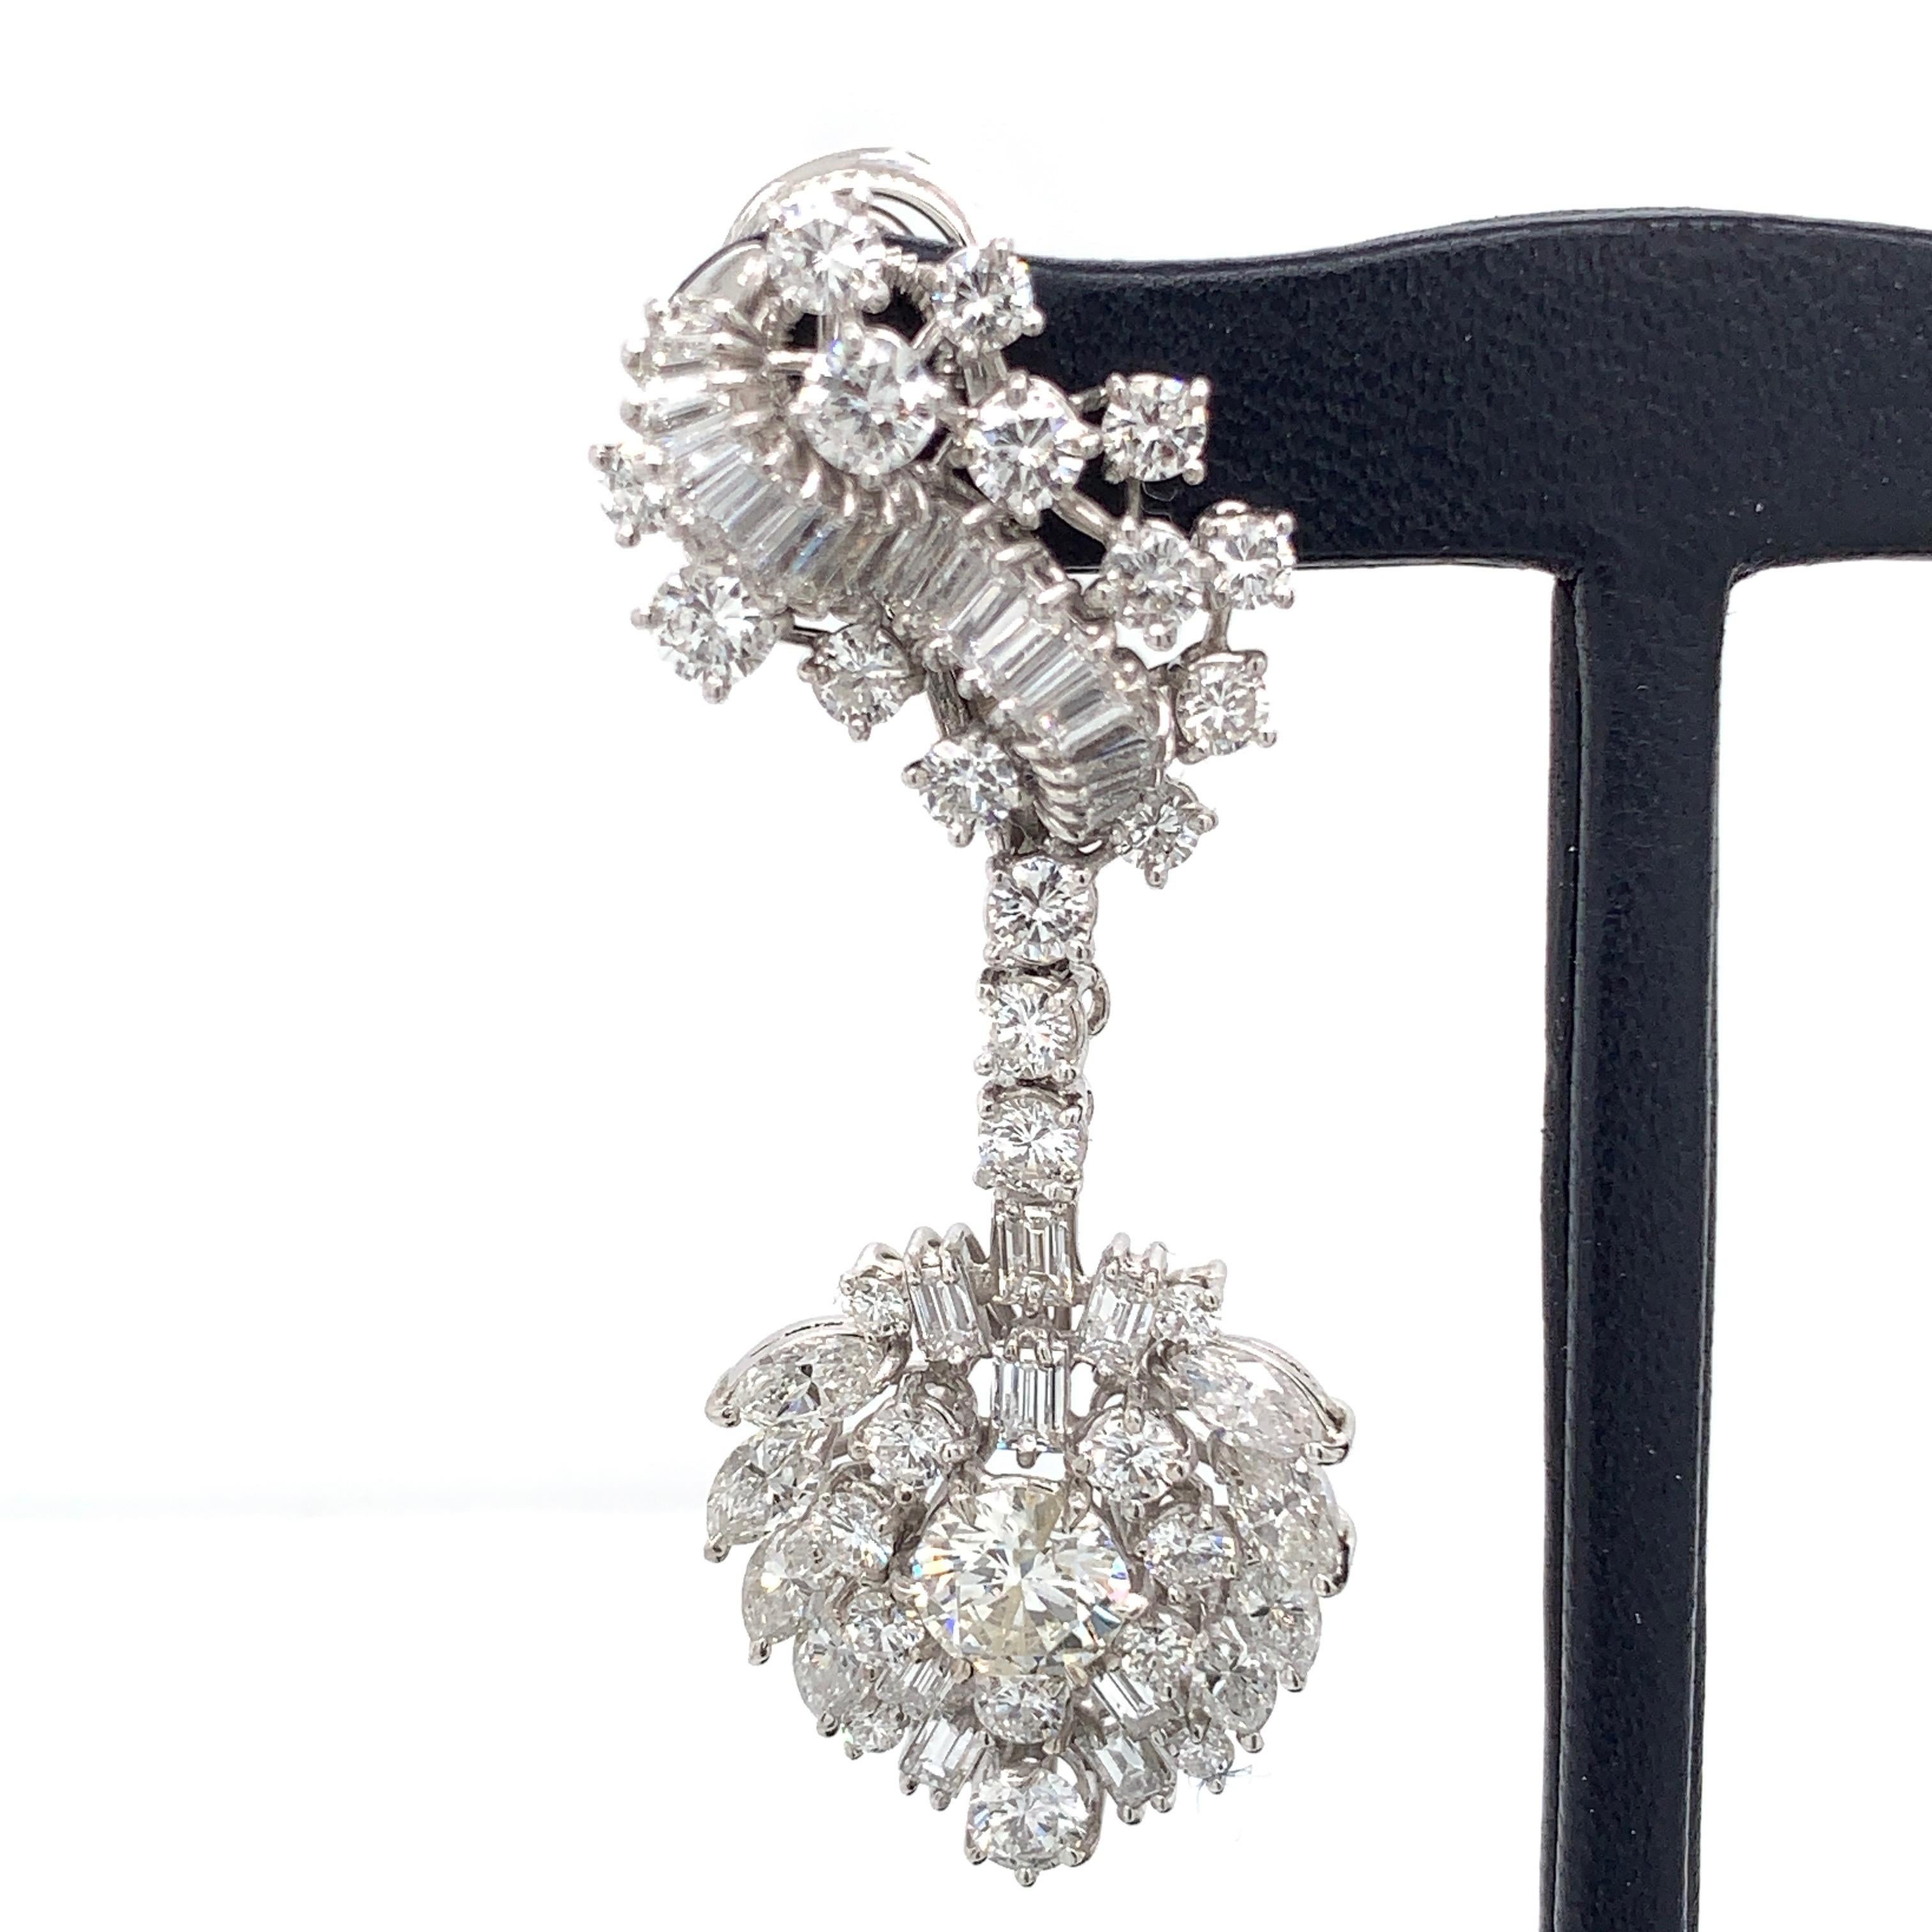 These spectacular estate earrings, circa 1970, feature approximately 11 carats of round and fancy shape diamonds. 

Center stone weight are approximately .75 carats each.
G-H color VS2-SI1 clarity. 

These cluster style drop earrings are set in 18k